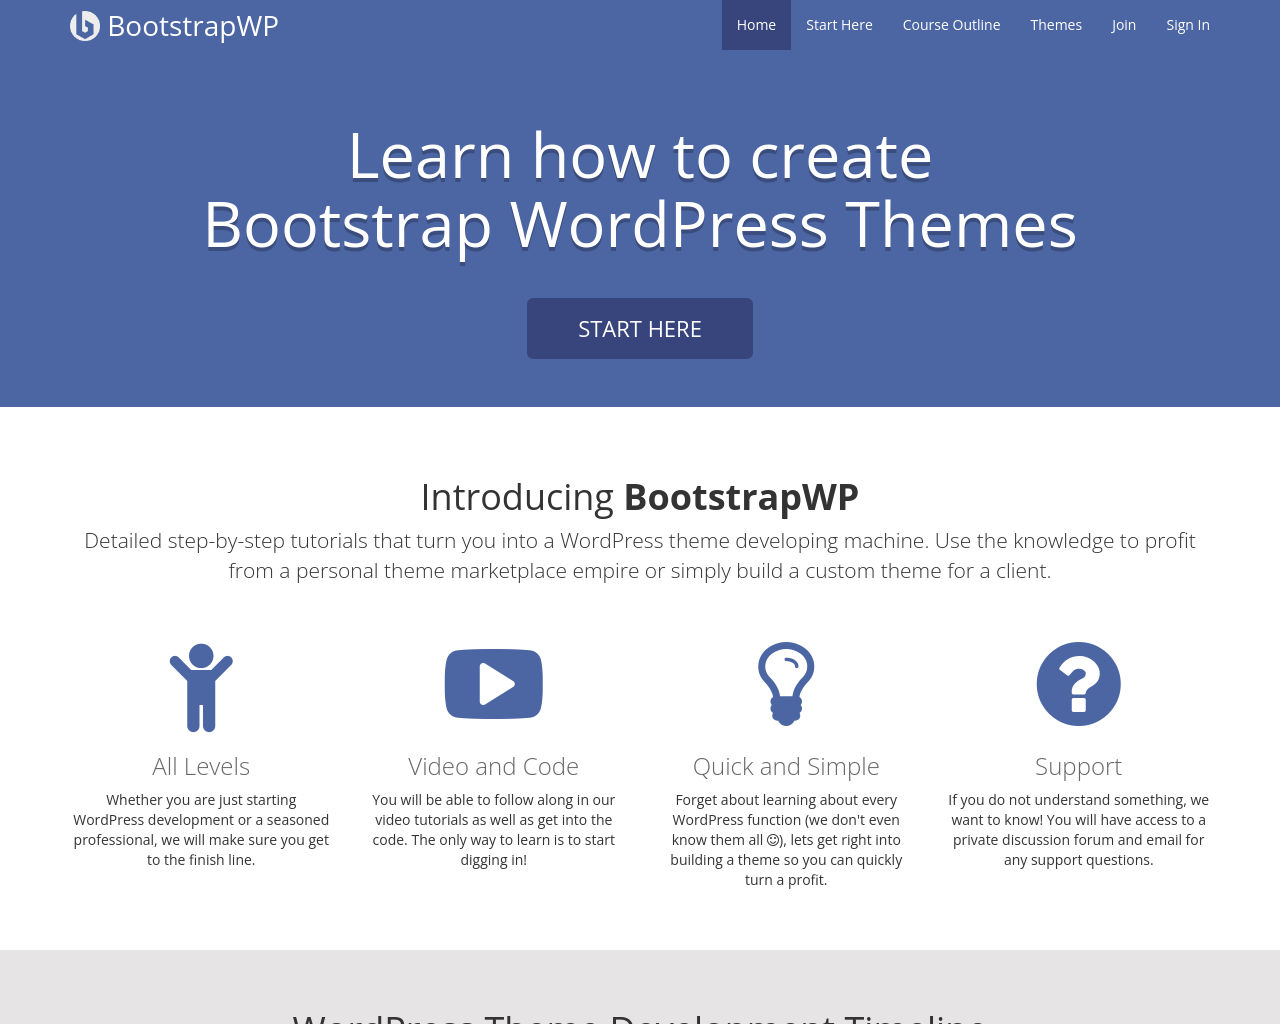 bootstrapwp.com